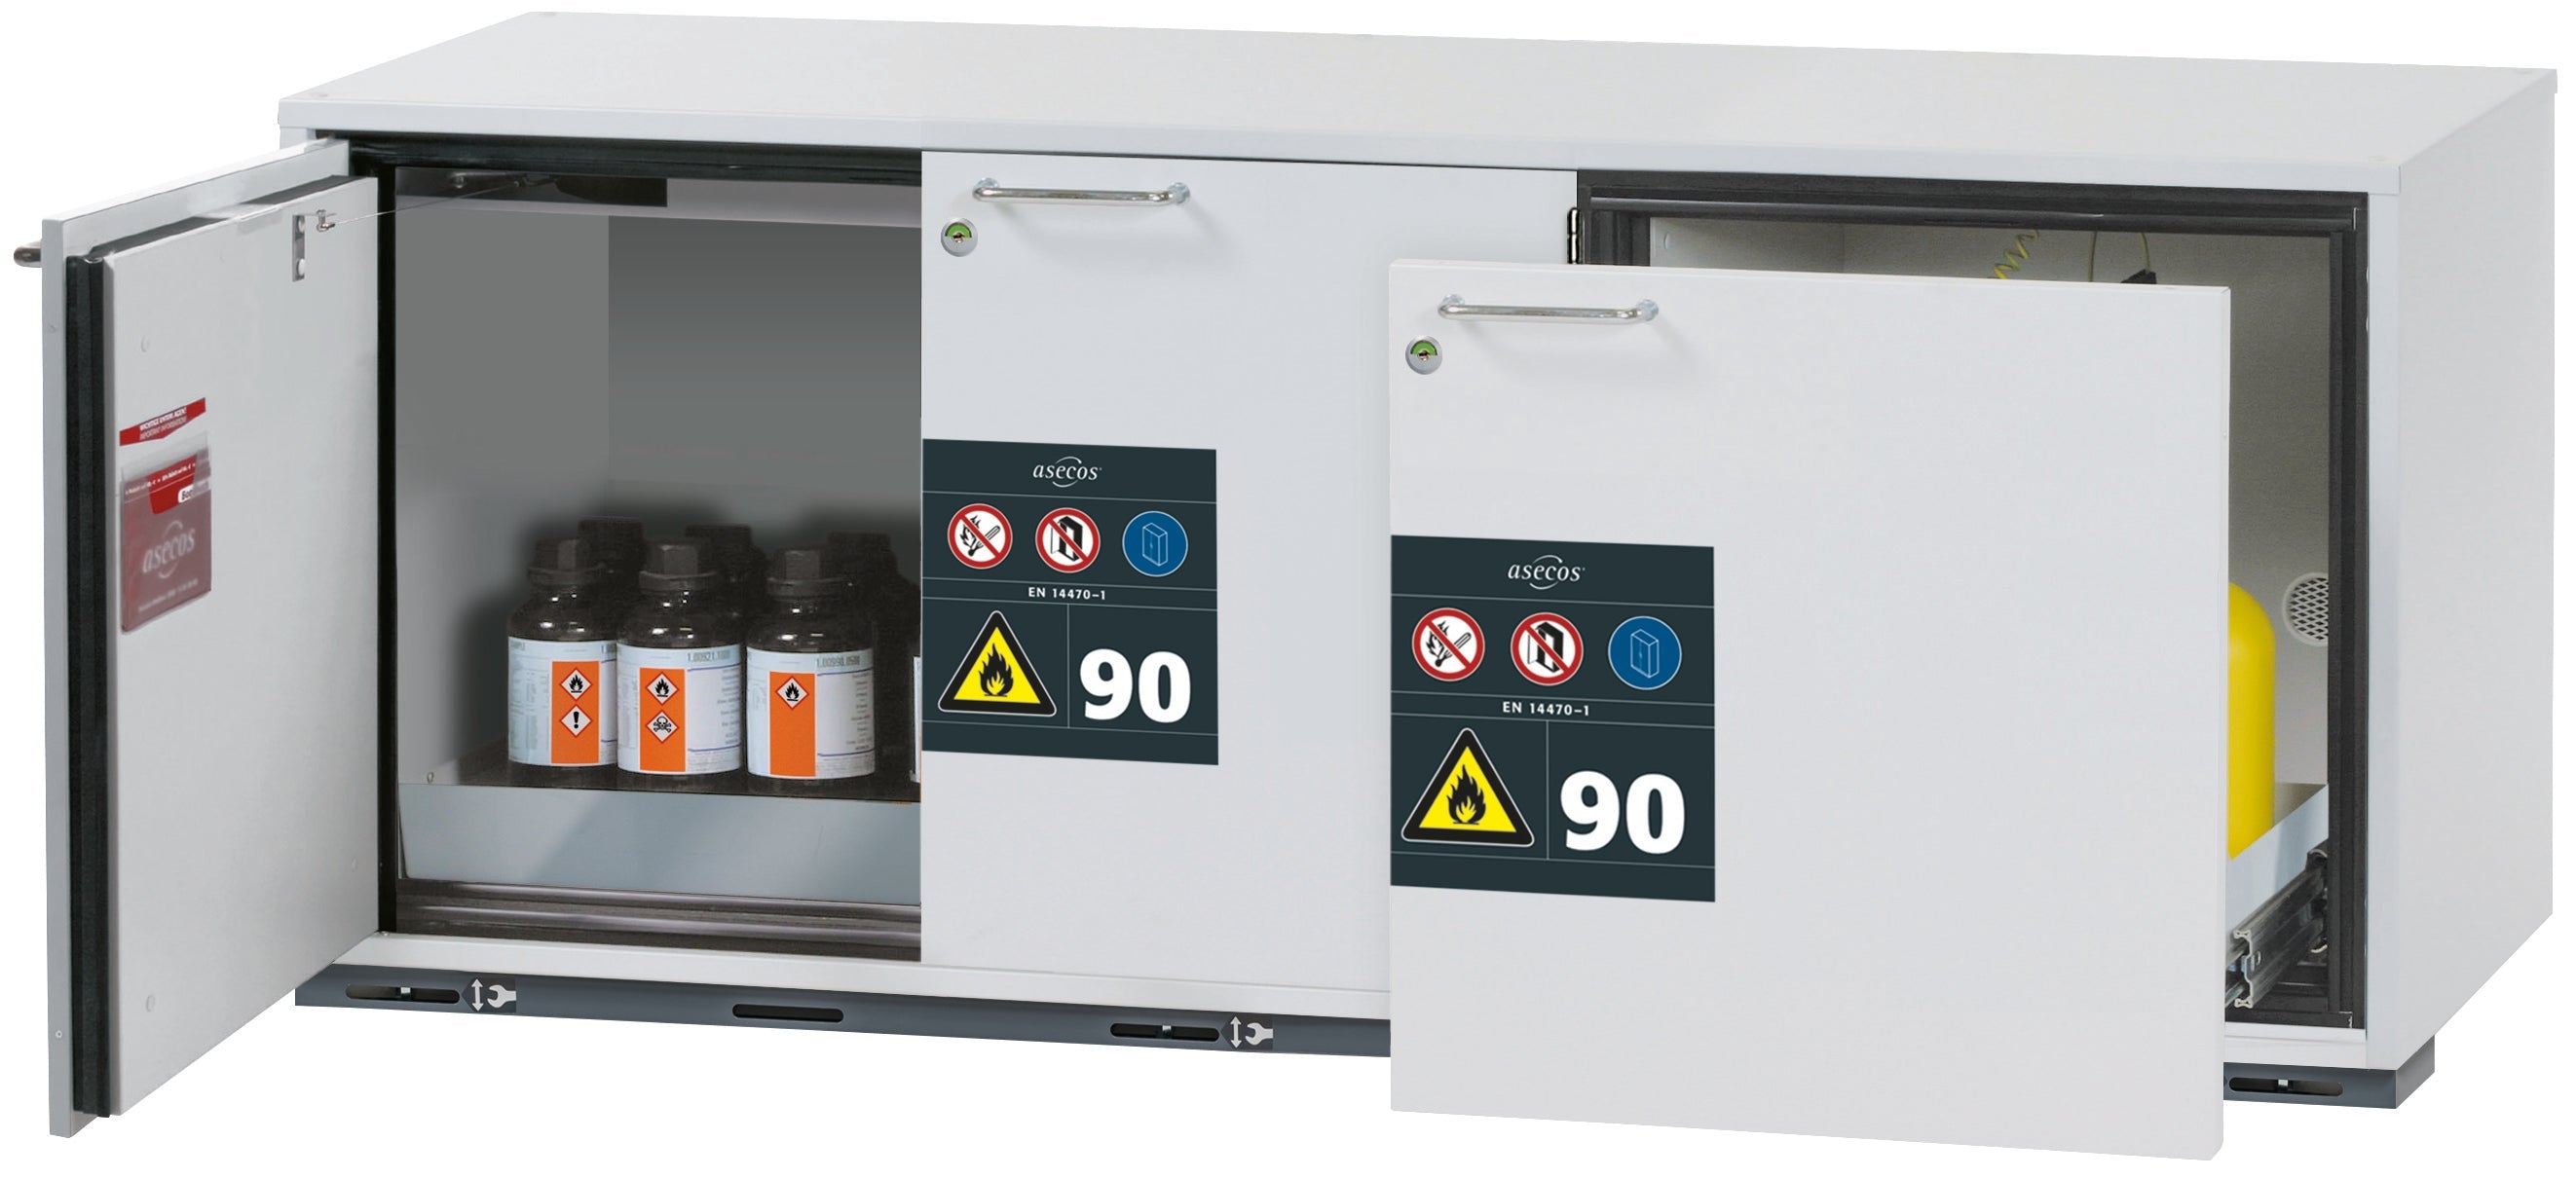 Type 90 safety base cabinet UB-ST-90 model UB90.060.140.S2T in light gray RAL 7035 with 1x perforated sheet metal insert standard (stainless steel 1.4016)